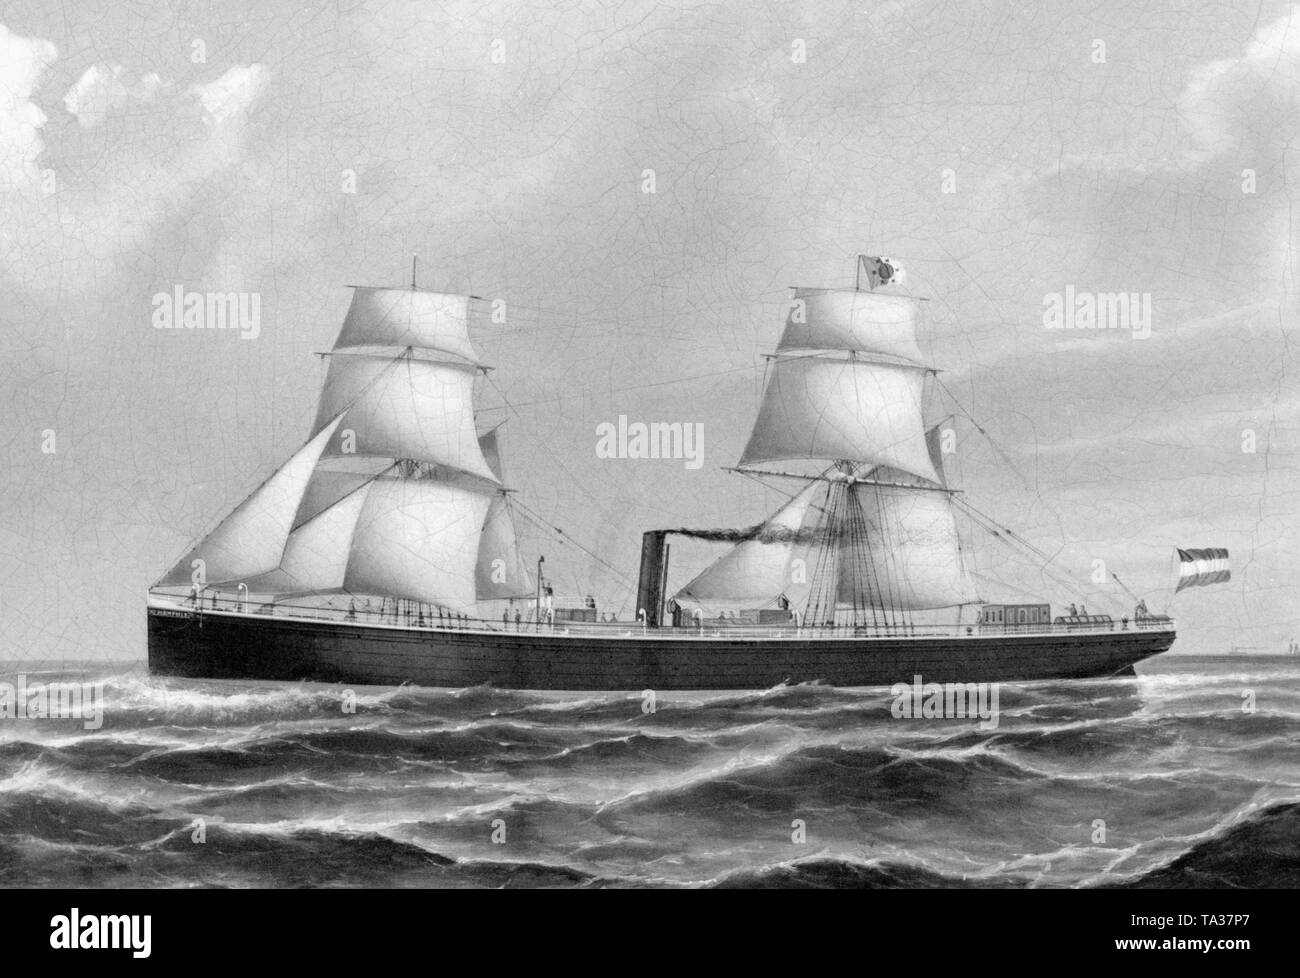 The 'Memphis' of the shipping company DDG Kosmos at sea. Between 1873 to 1891 the ship was in service of the DDG and was scrapped in 1921. Stock Photo